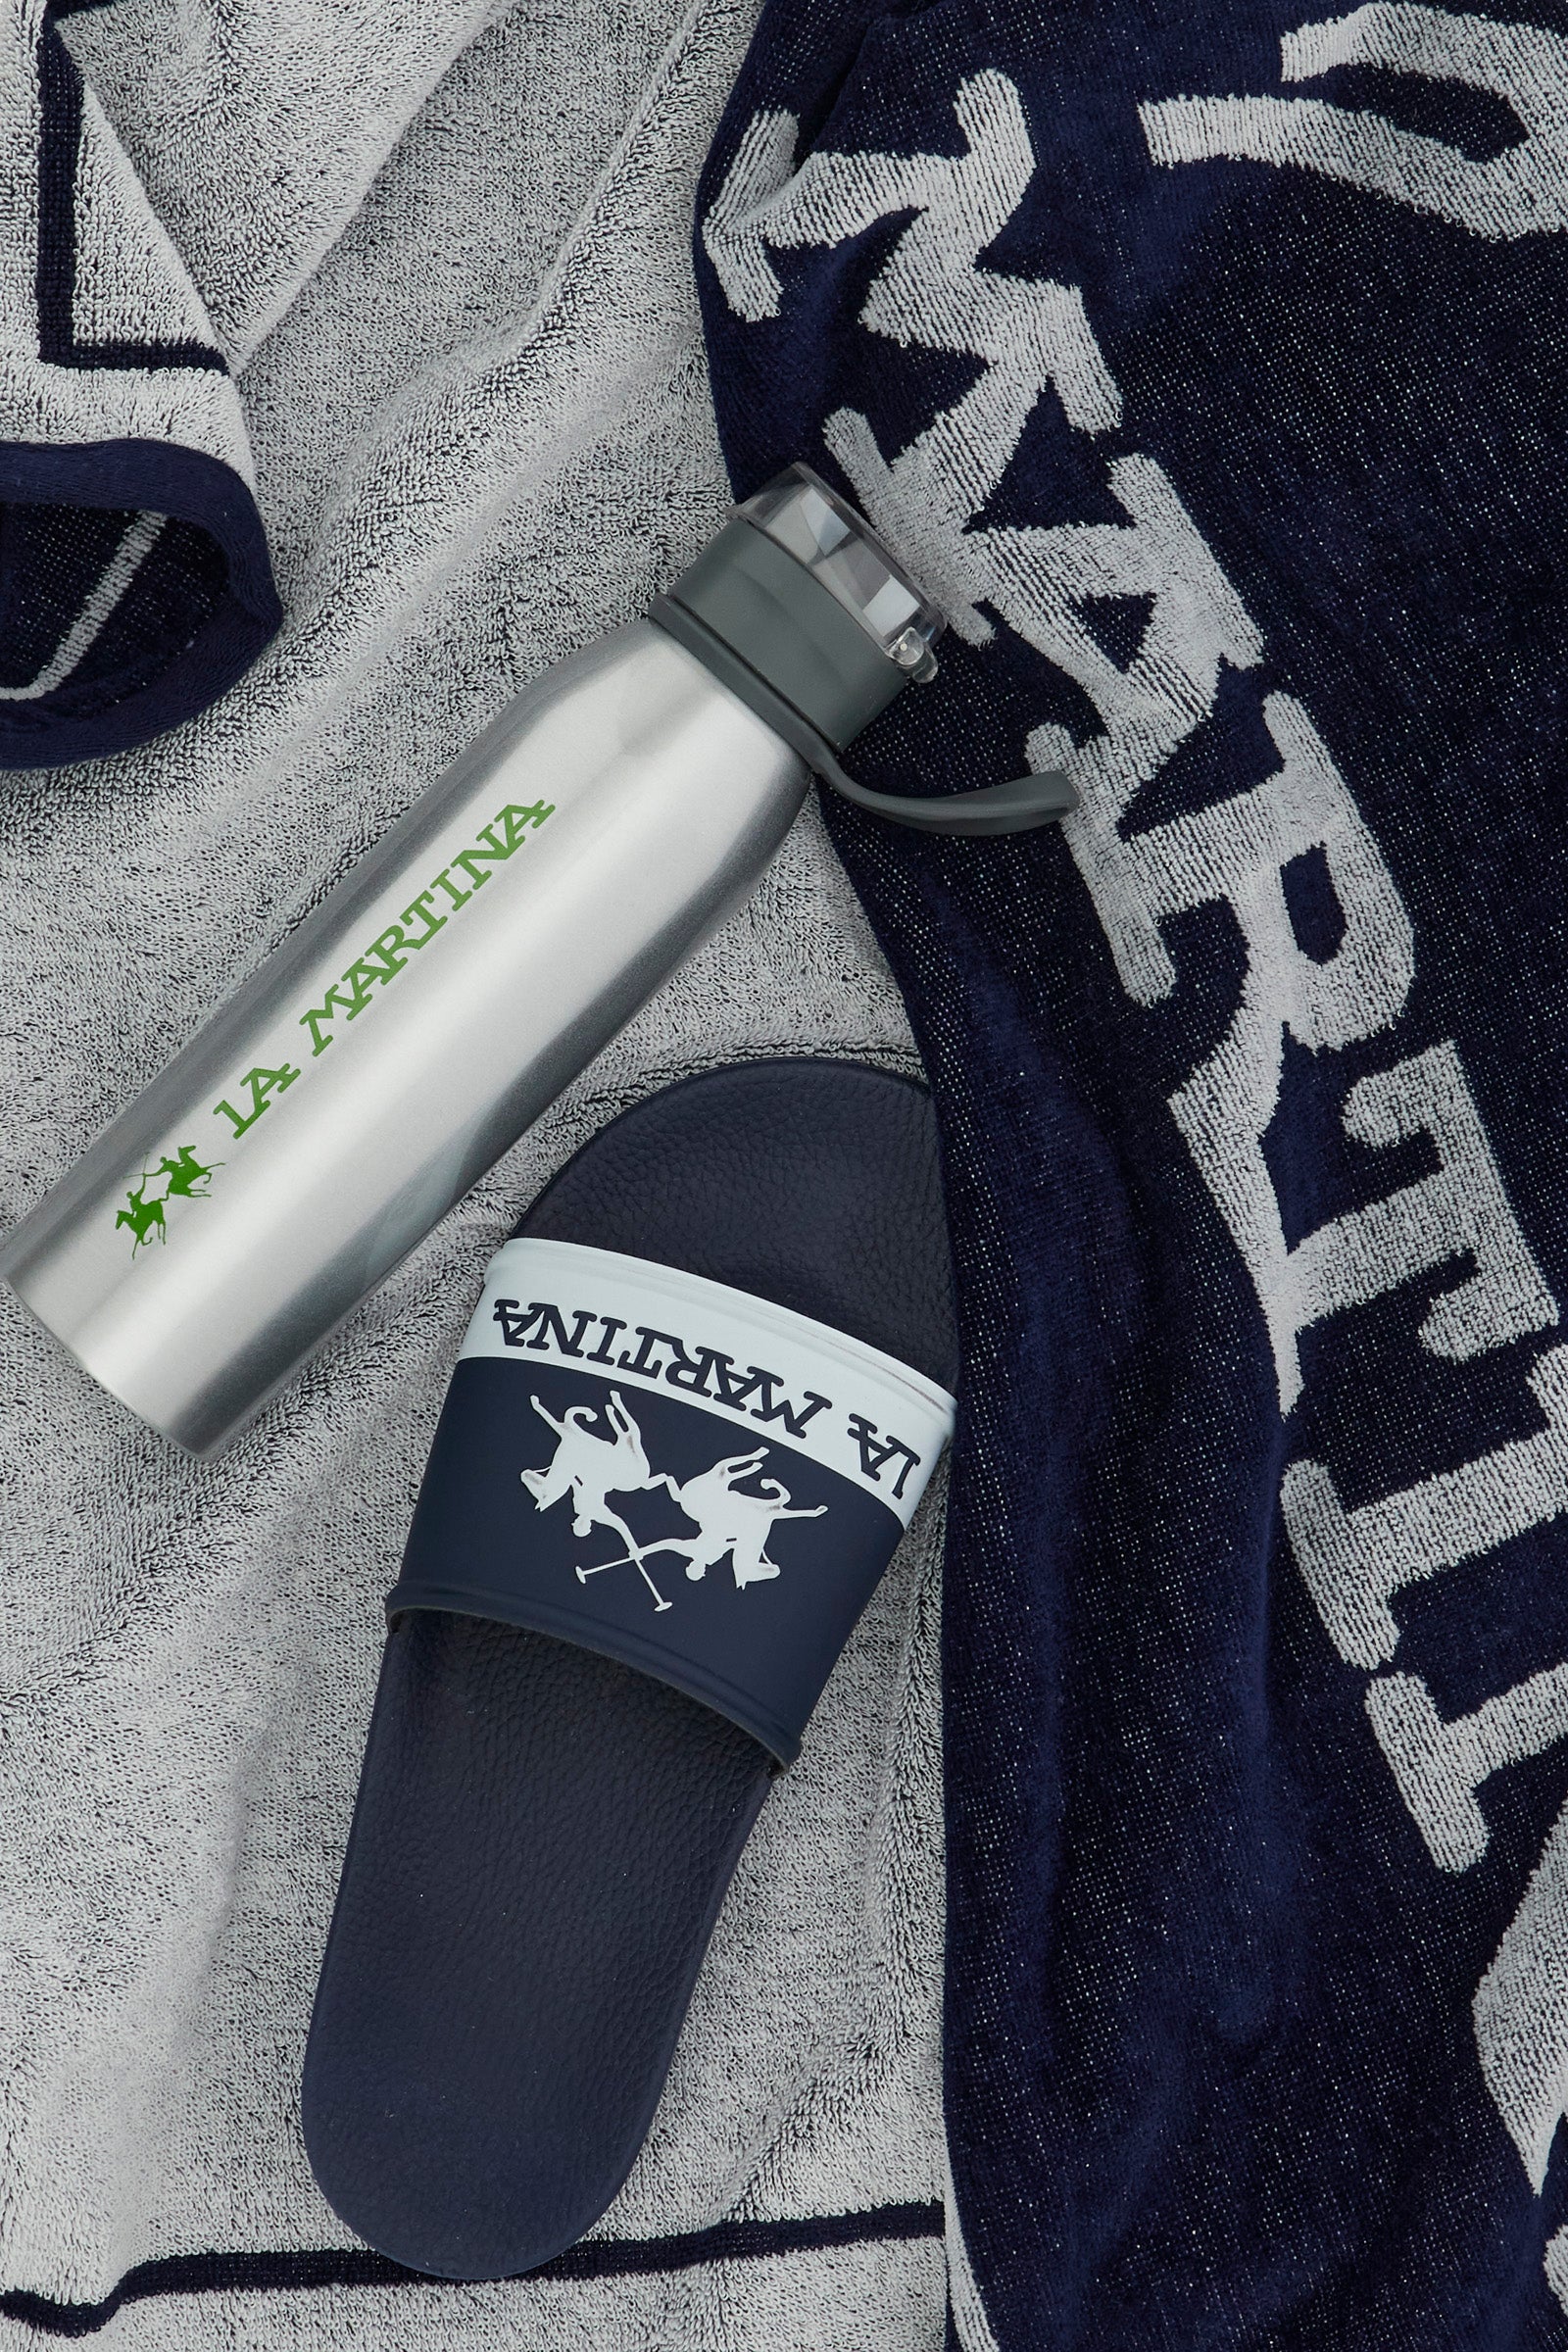 Unisex aluminium bottle with a watertight lid and logo